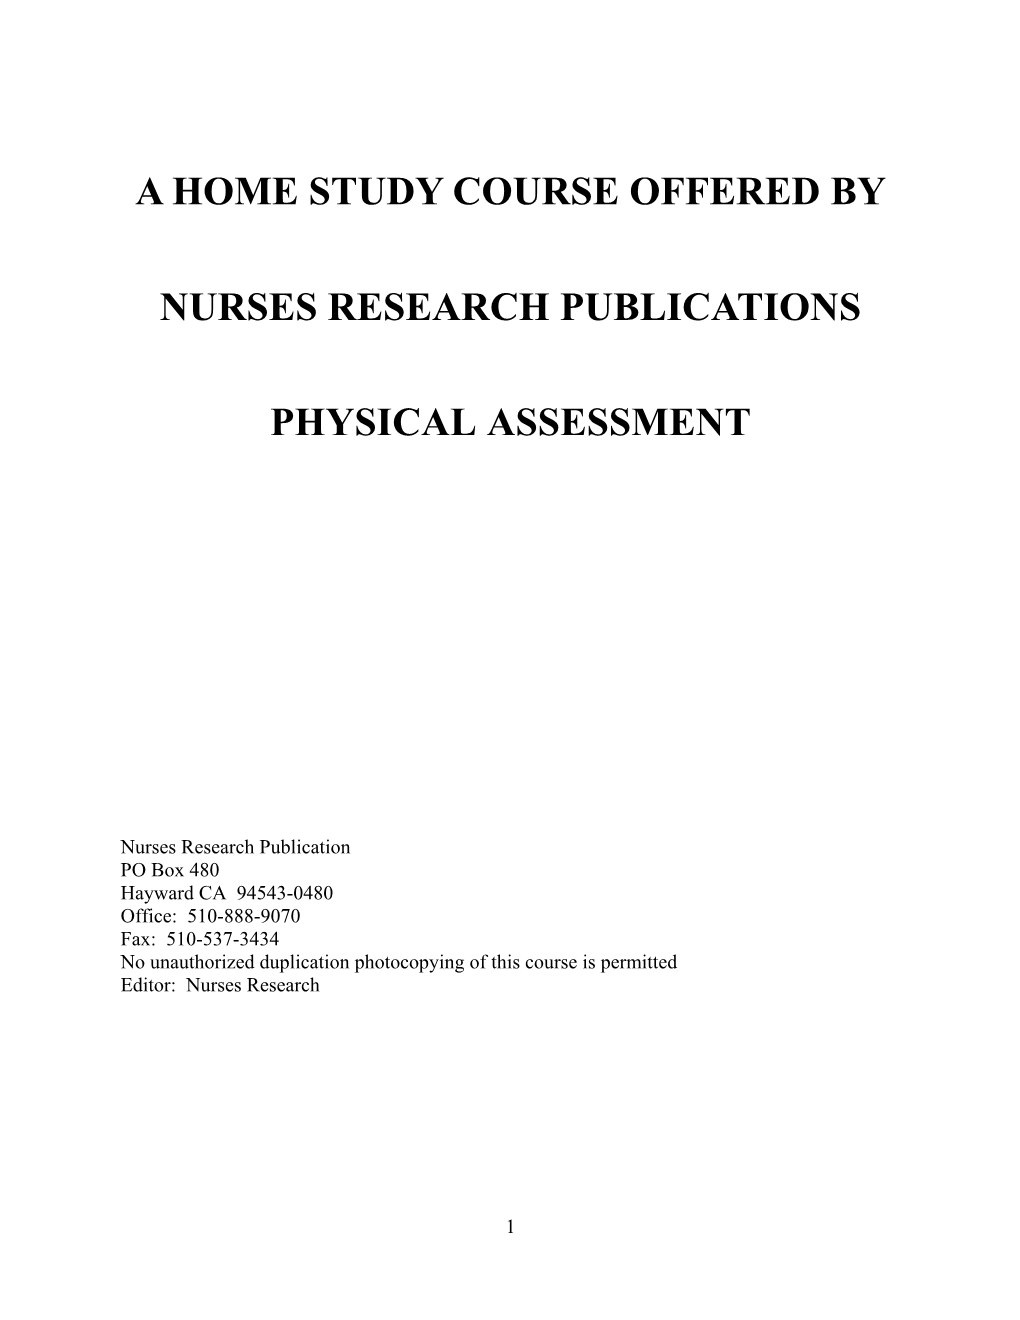 A Home Study Course Offered by Nurses Research